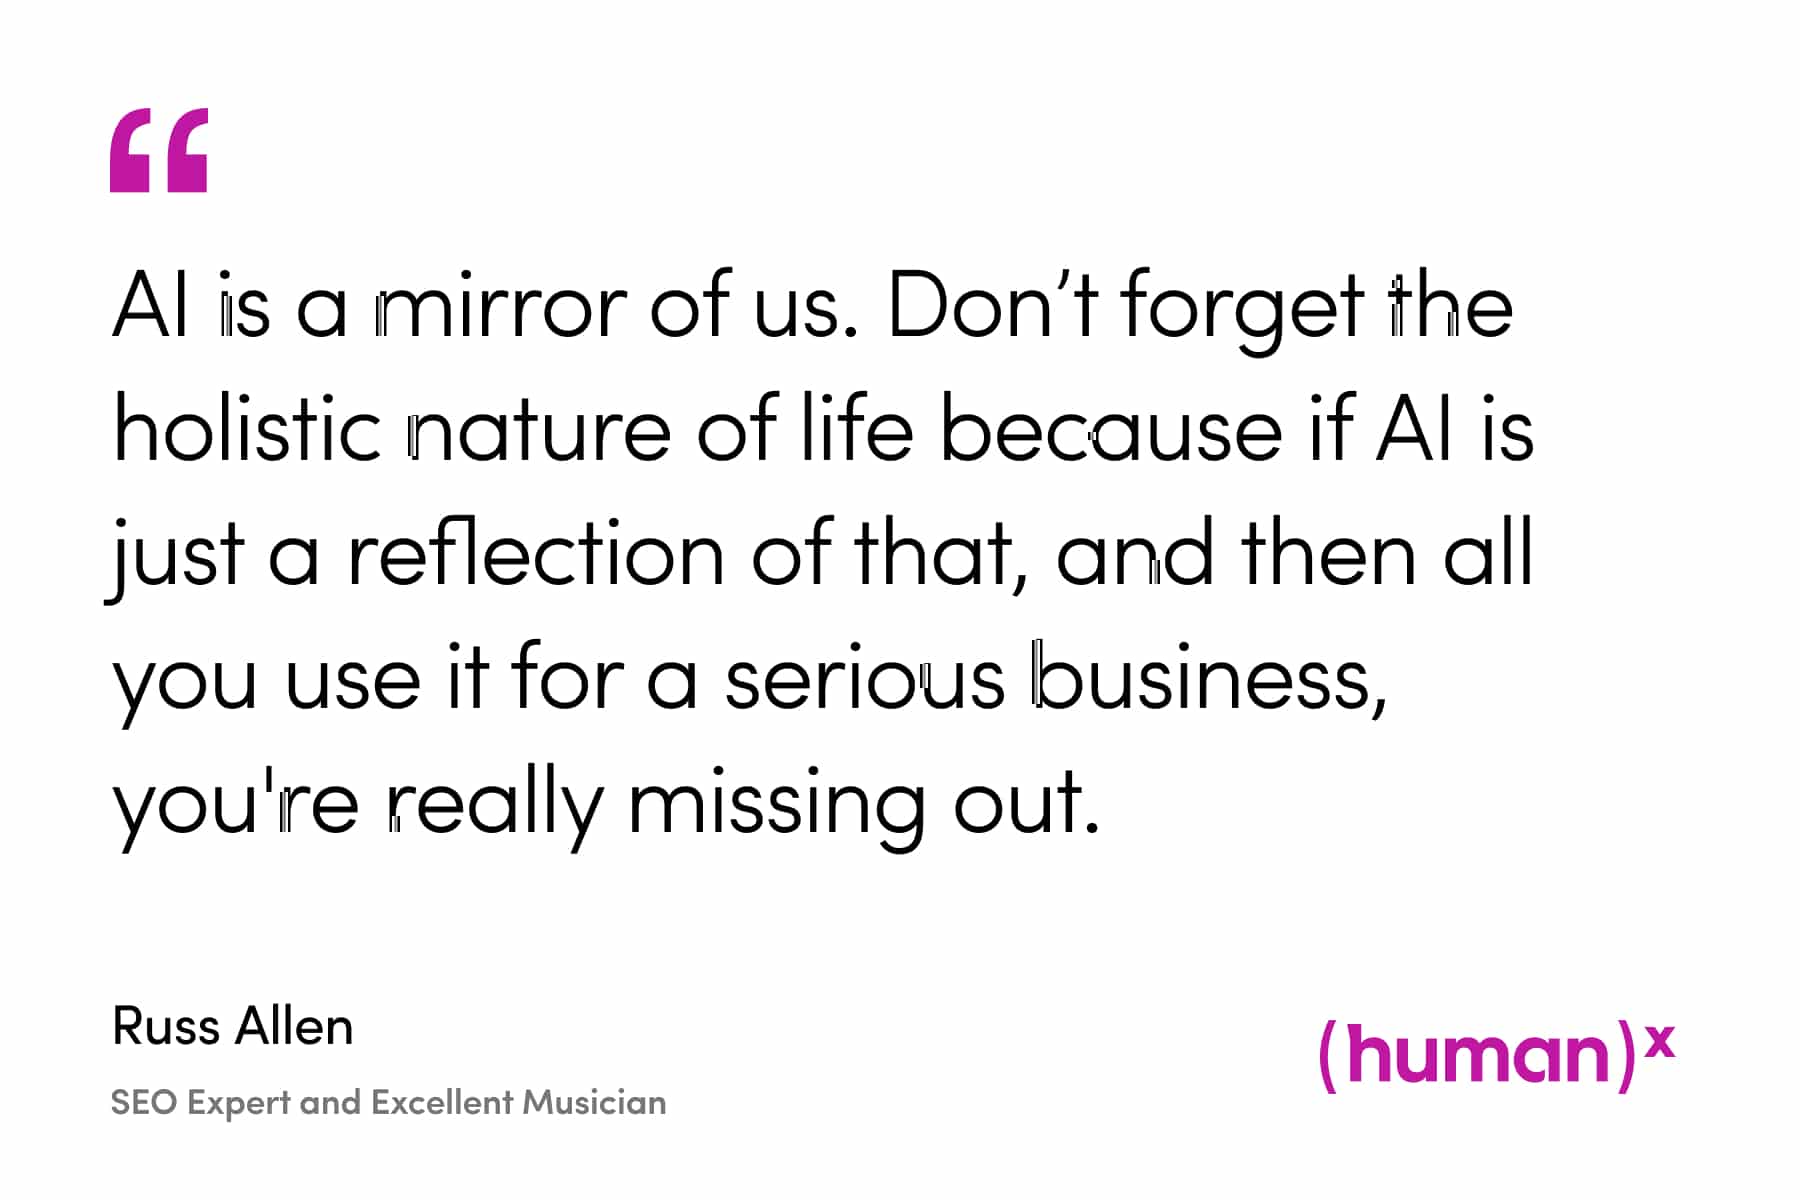 quote from Russ Allen, "AI is a mirror of us. Don’t forget the holistic nature of life because if AI is just a reflection of that, and then all you use it for a serious business, you're really missing out. "